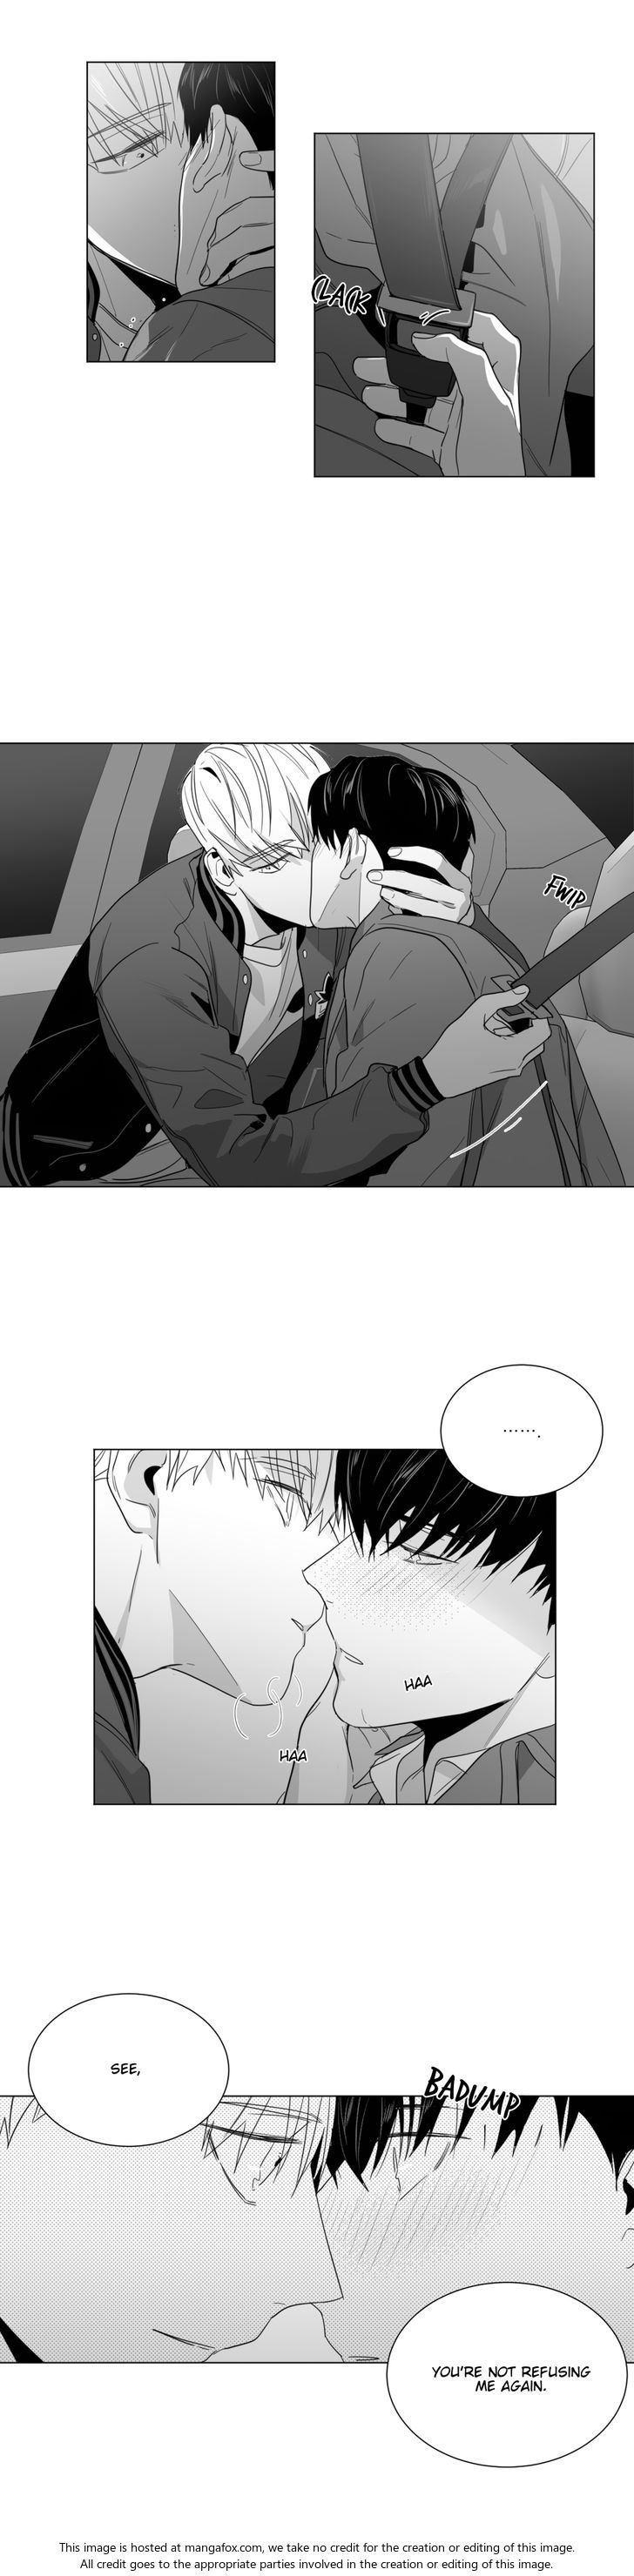 Lover Boy (Lezhin) Chapter 026 page 3